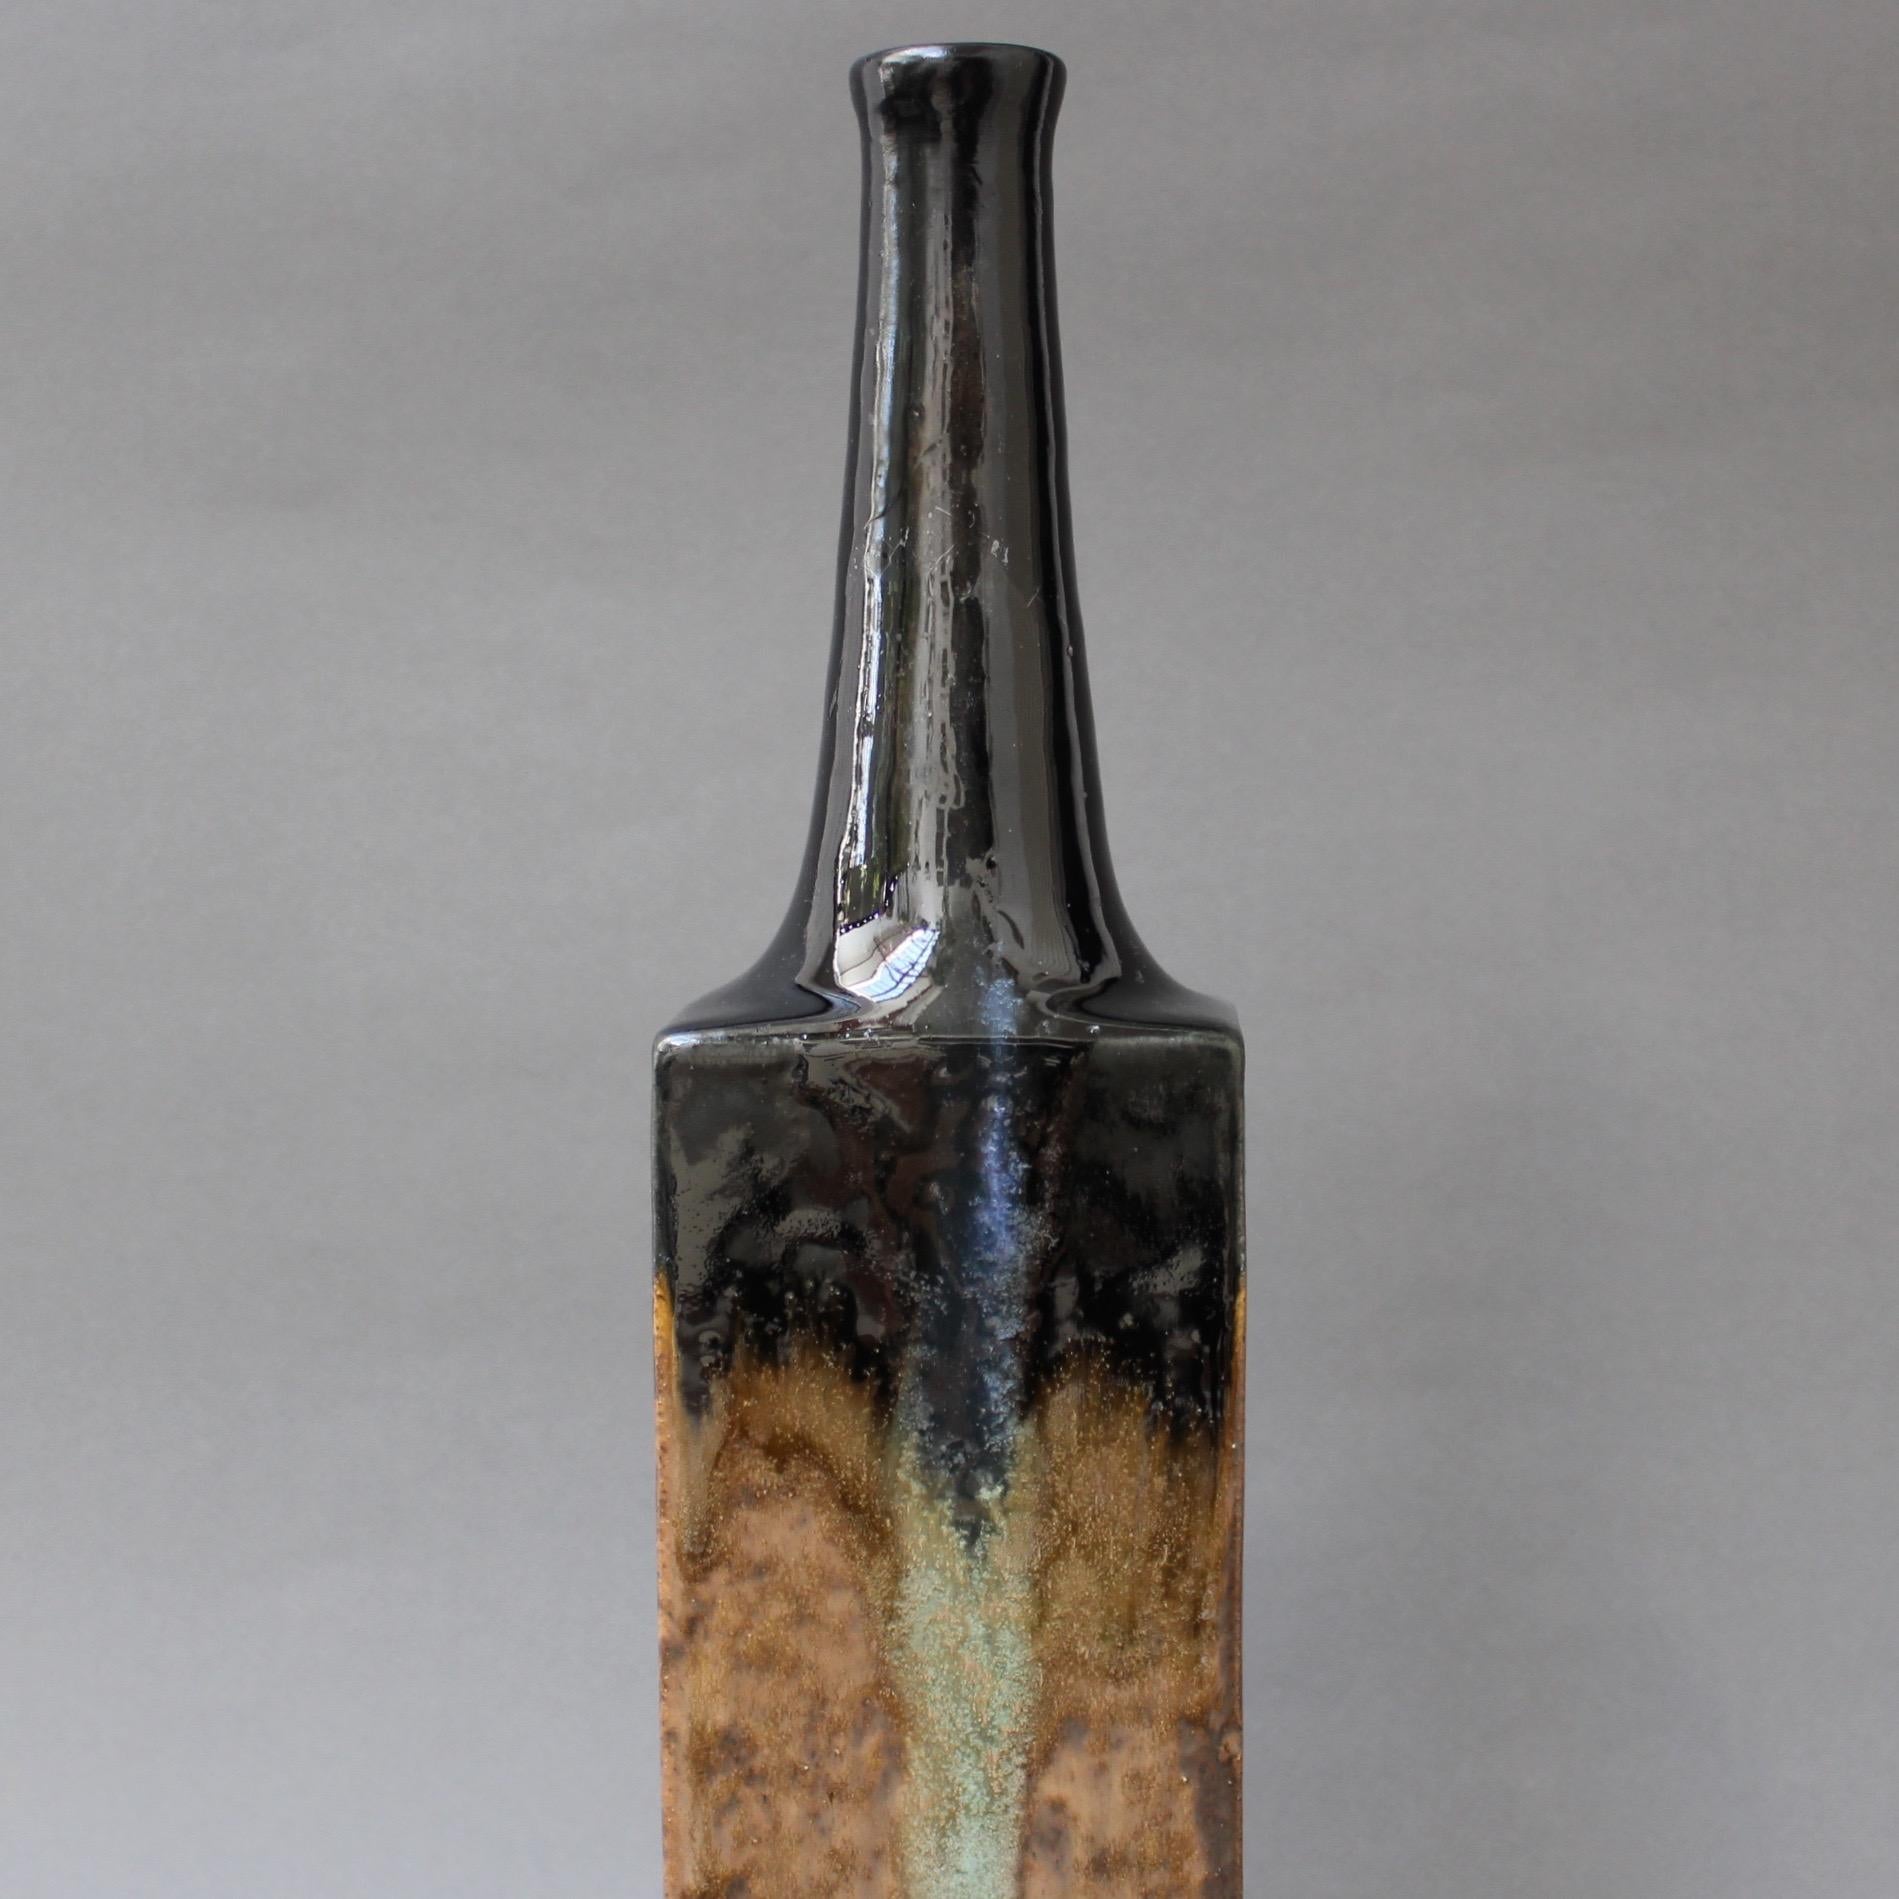 Black and Chocolate Brown Ceramic Bottle-Shaped Vase by Bruno Gambone, c. 1980s For Sale 3